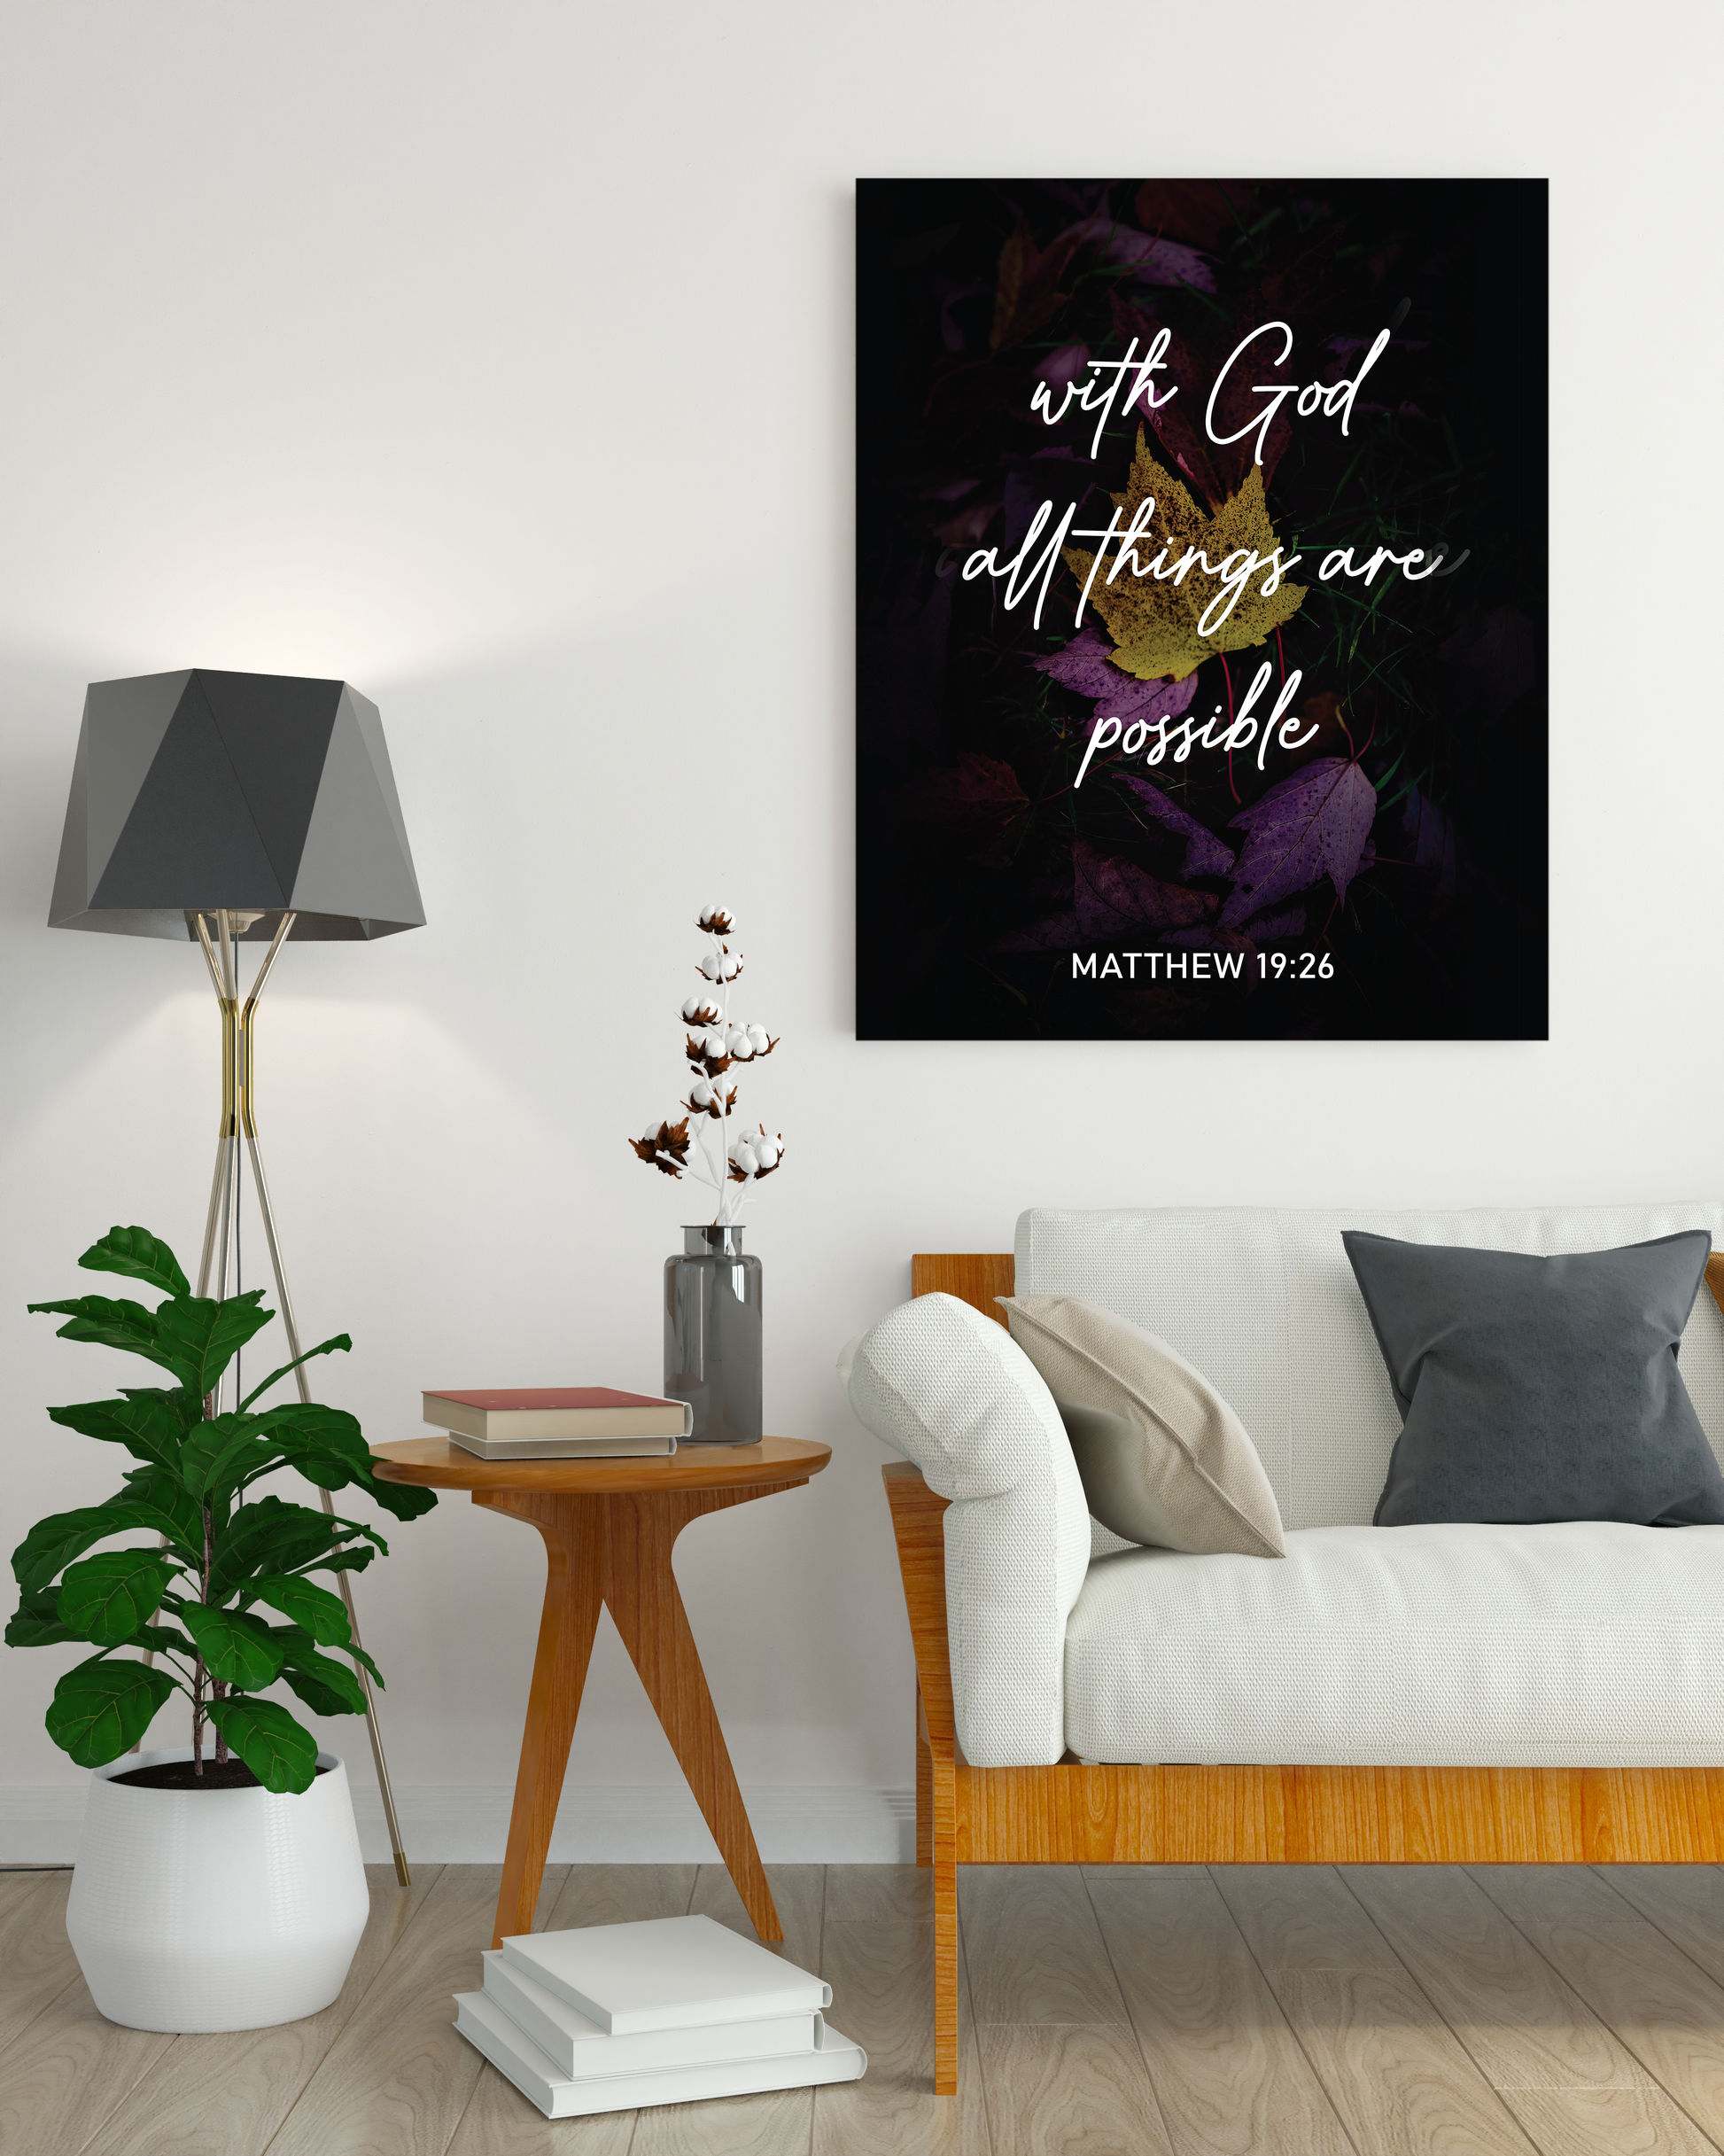 Motivational "With God all things are possible" Canvas Print - USTAD HOME